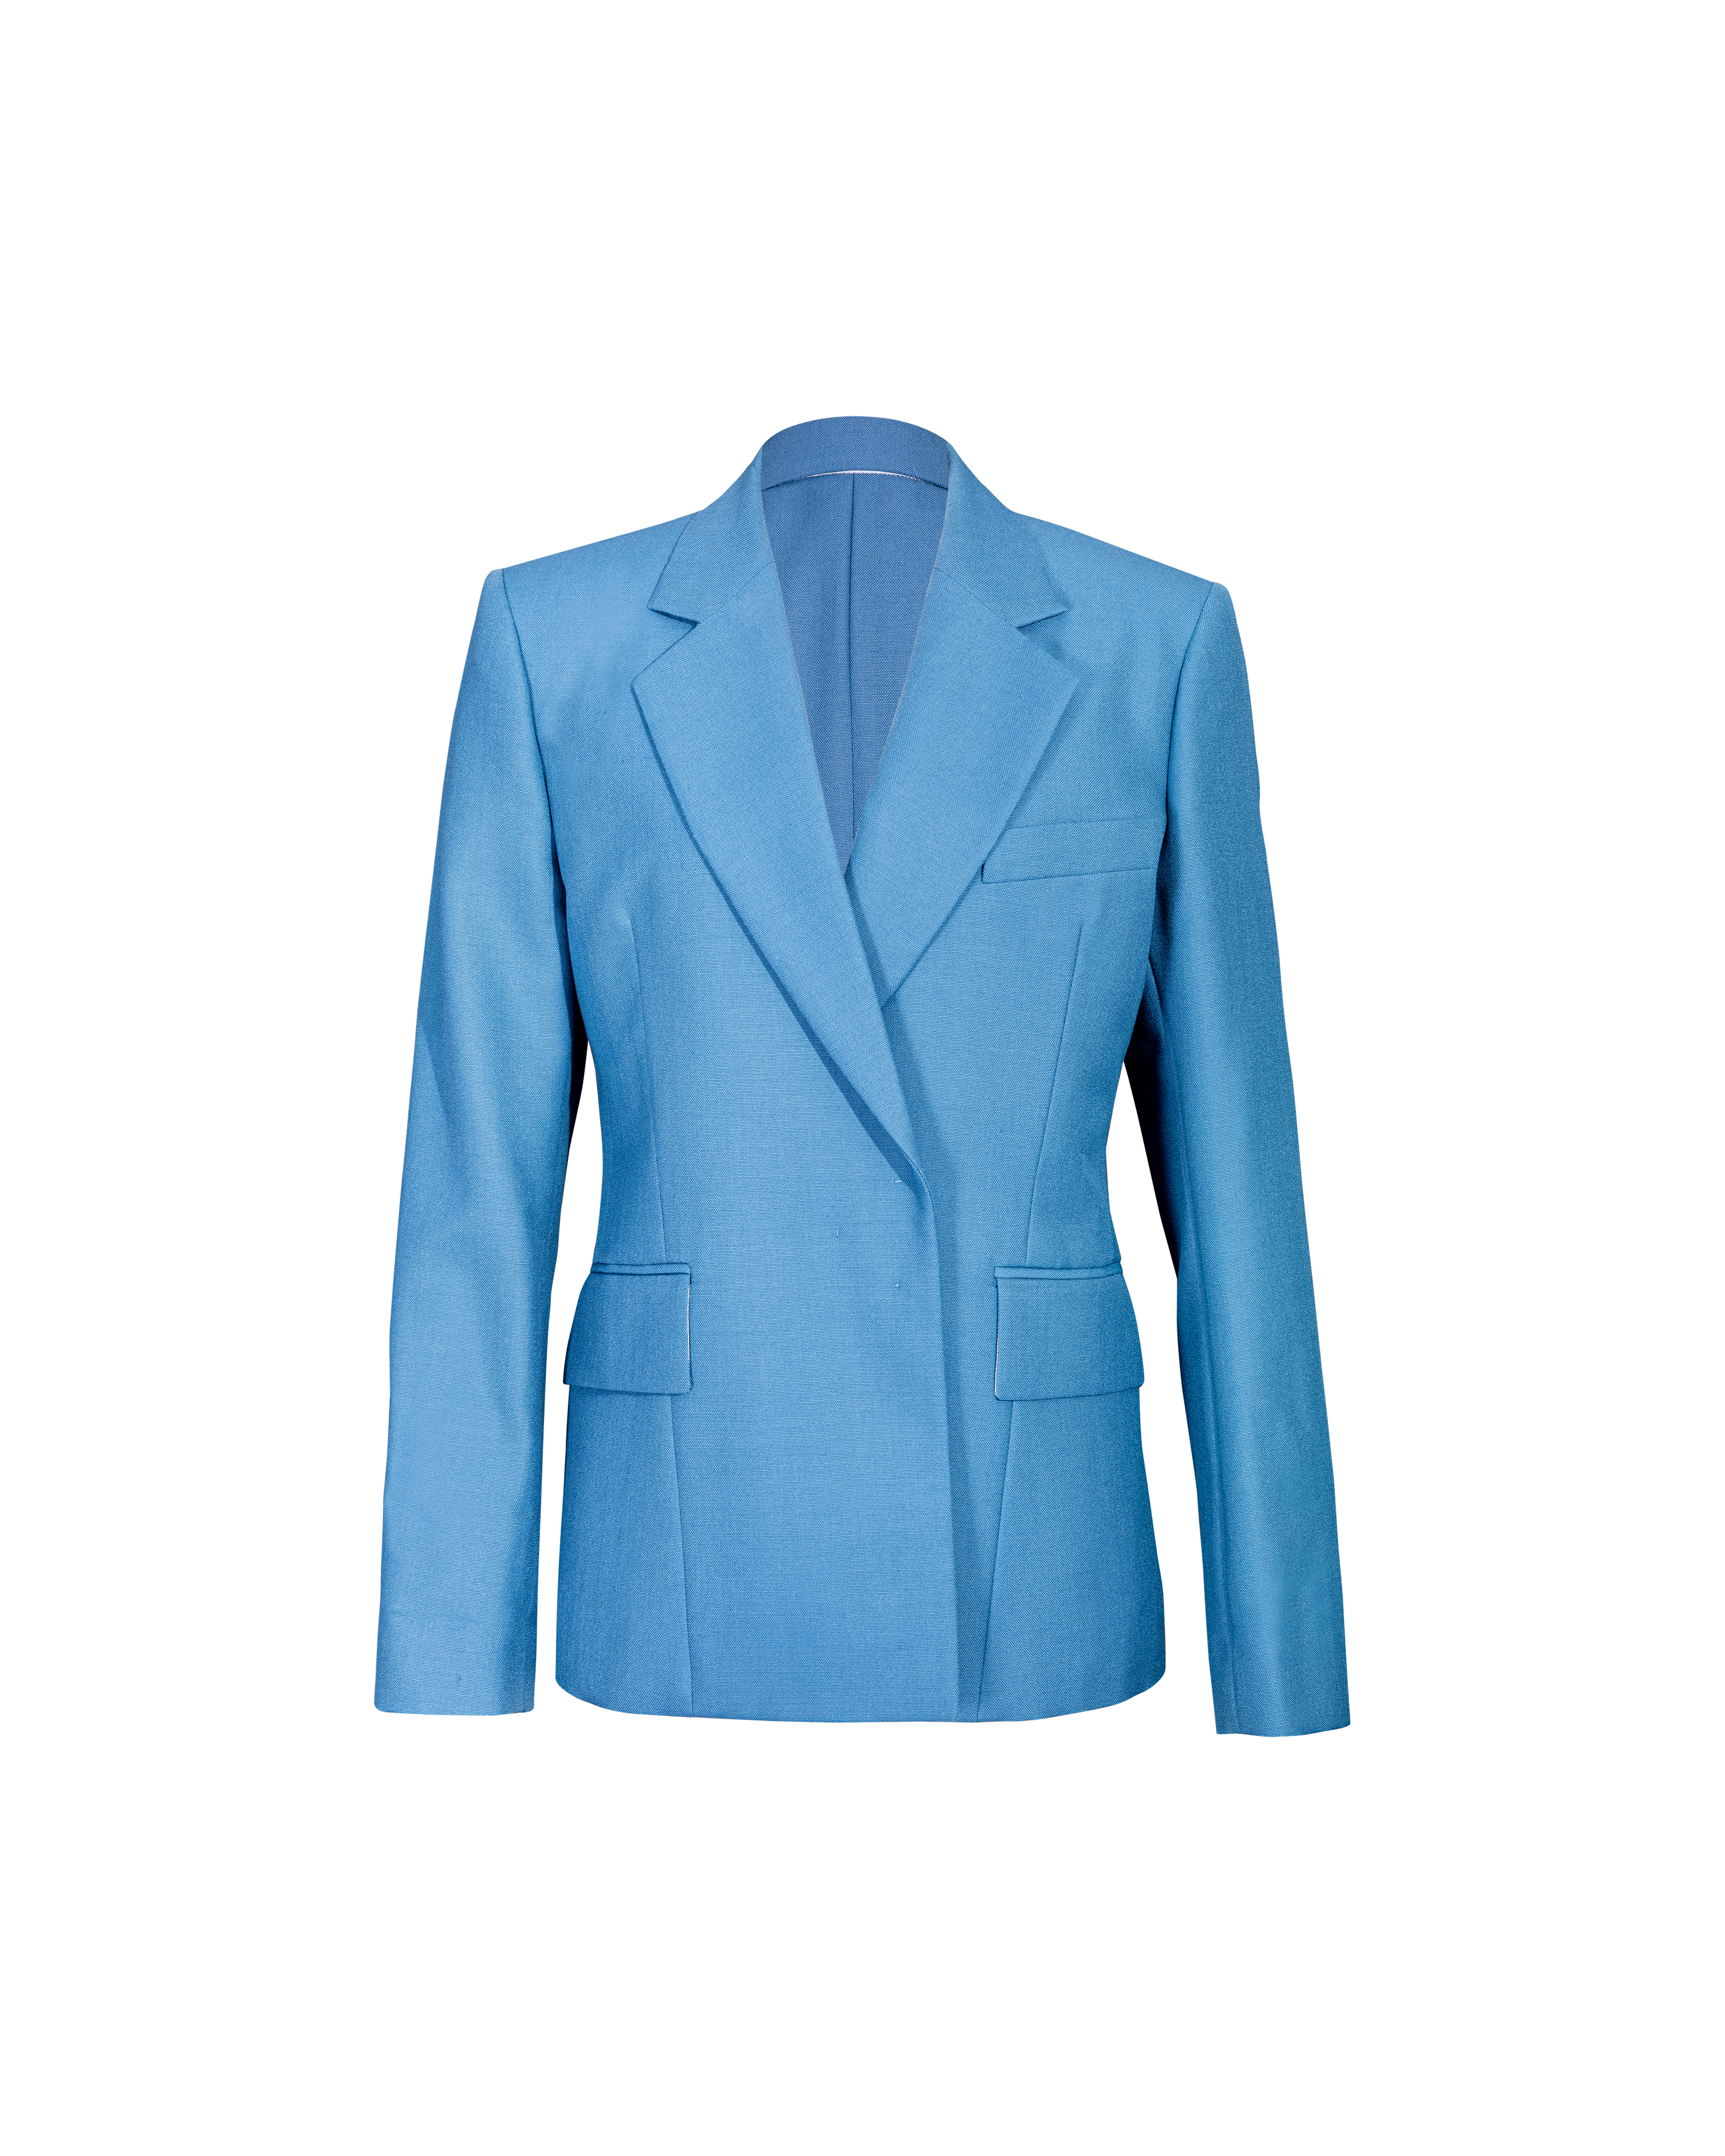 S/S 2017 Teal Blazer with Silver Clasp